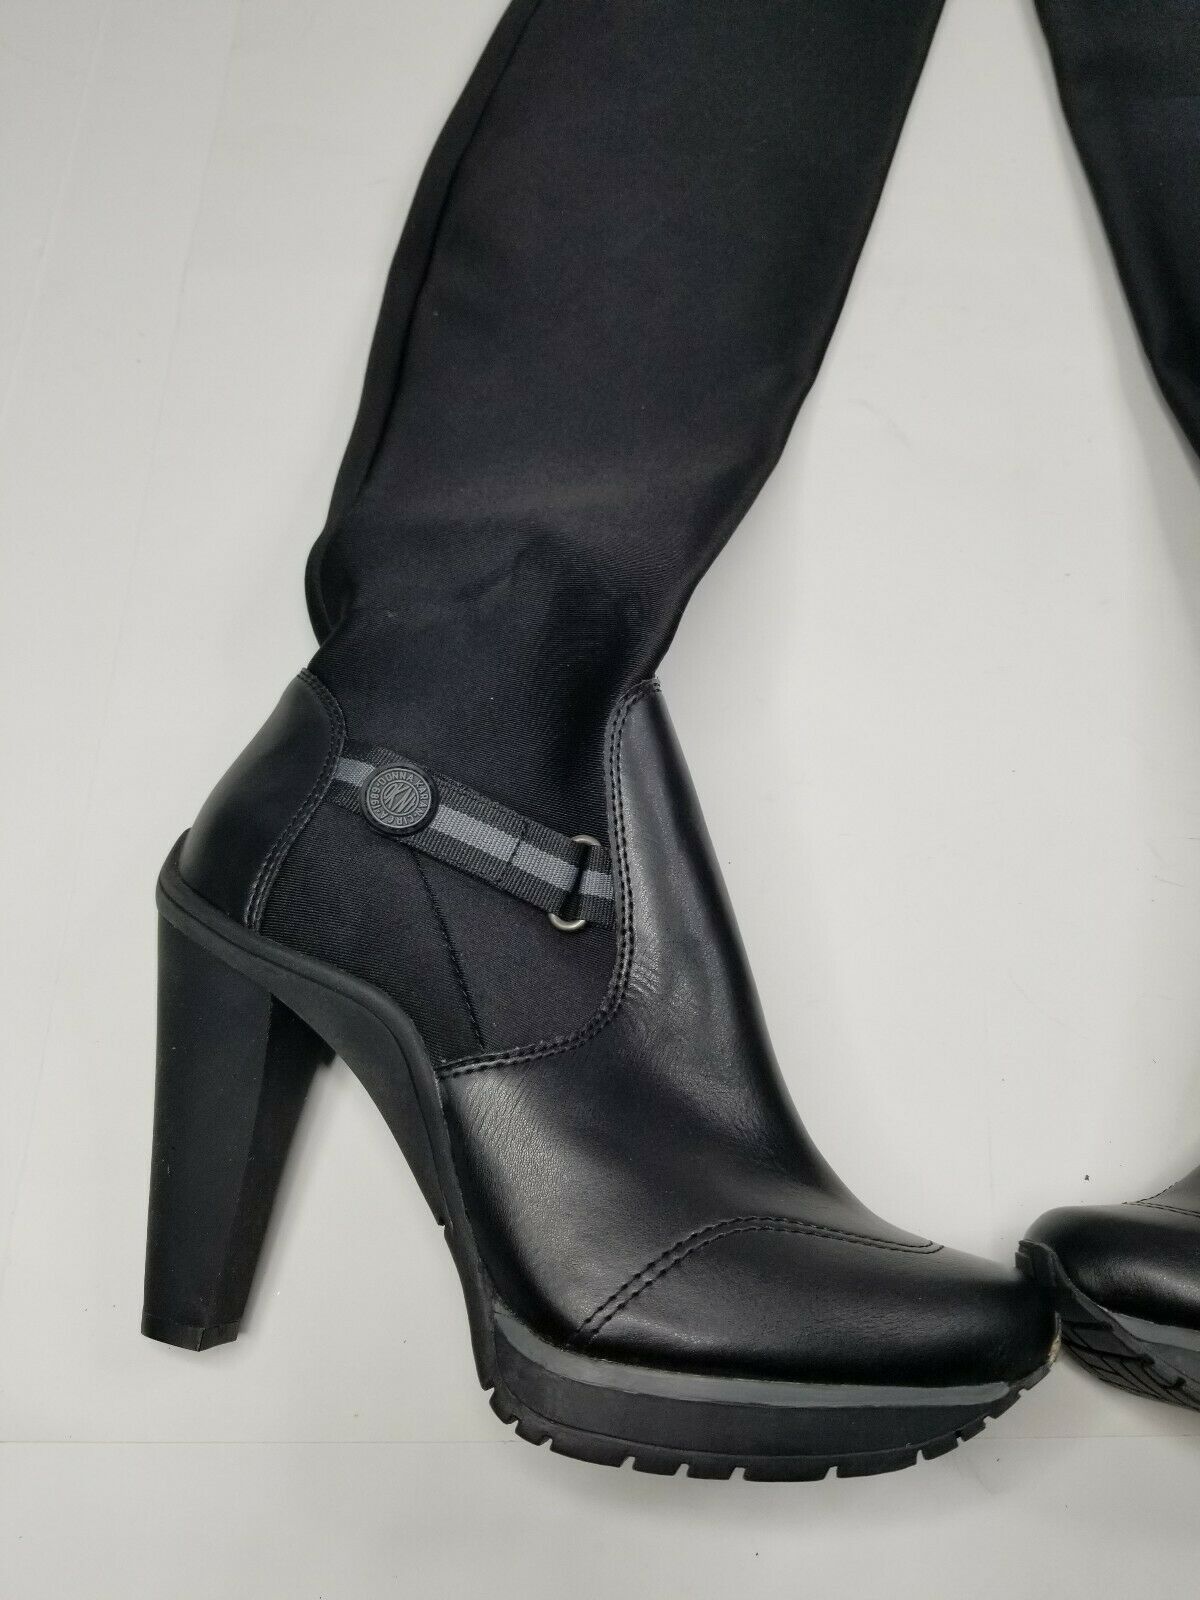 DKNY DKNY Browning Womens Black Neoprene Over-The-Knee Boots Size US 10 / EU 43 - 4 Thumbnail